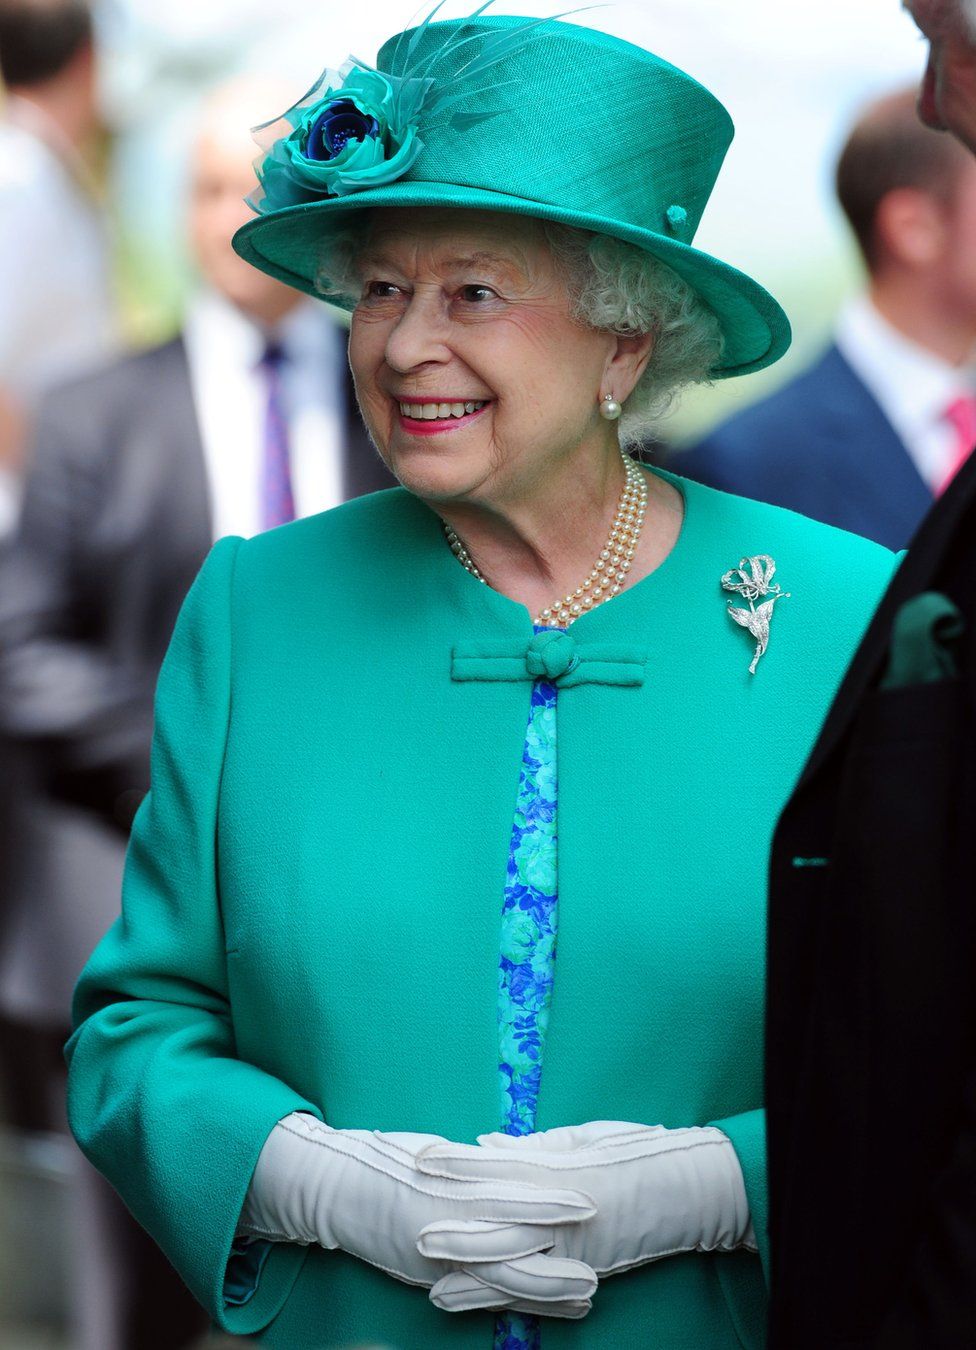 Queen Elizabeth II smiles during her trip to Bowness on Windermere, Cumbria on 17 July, 2013